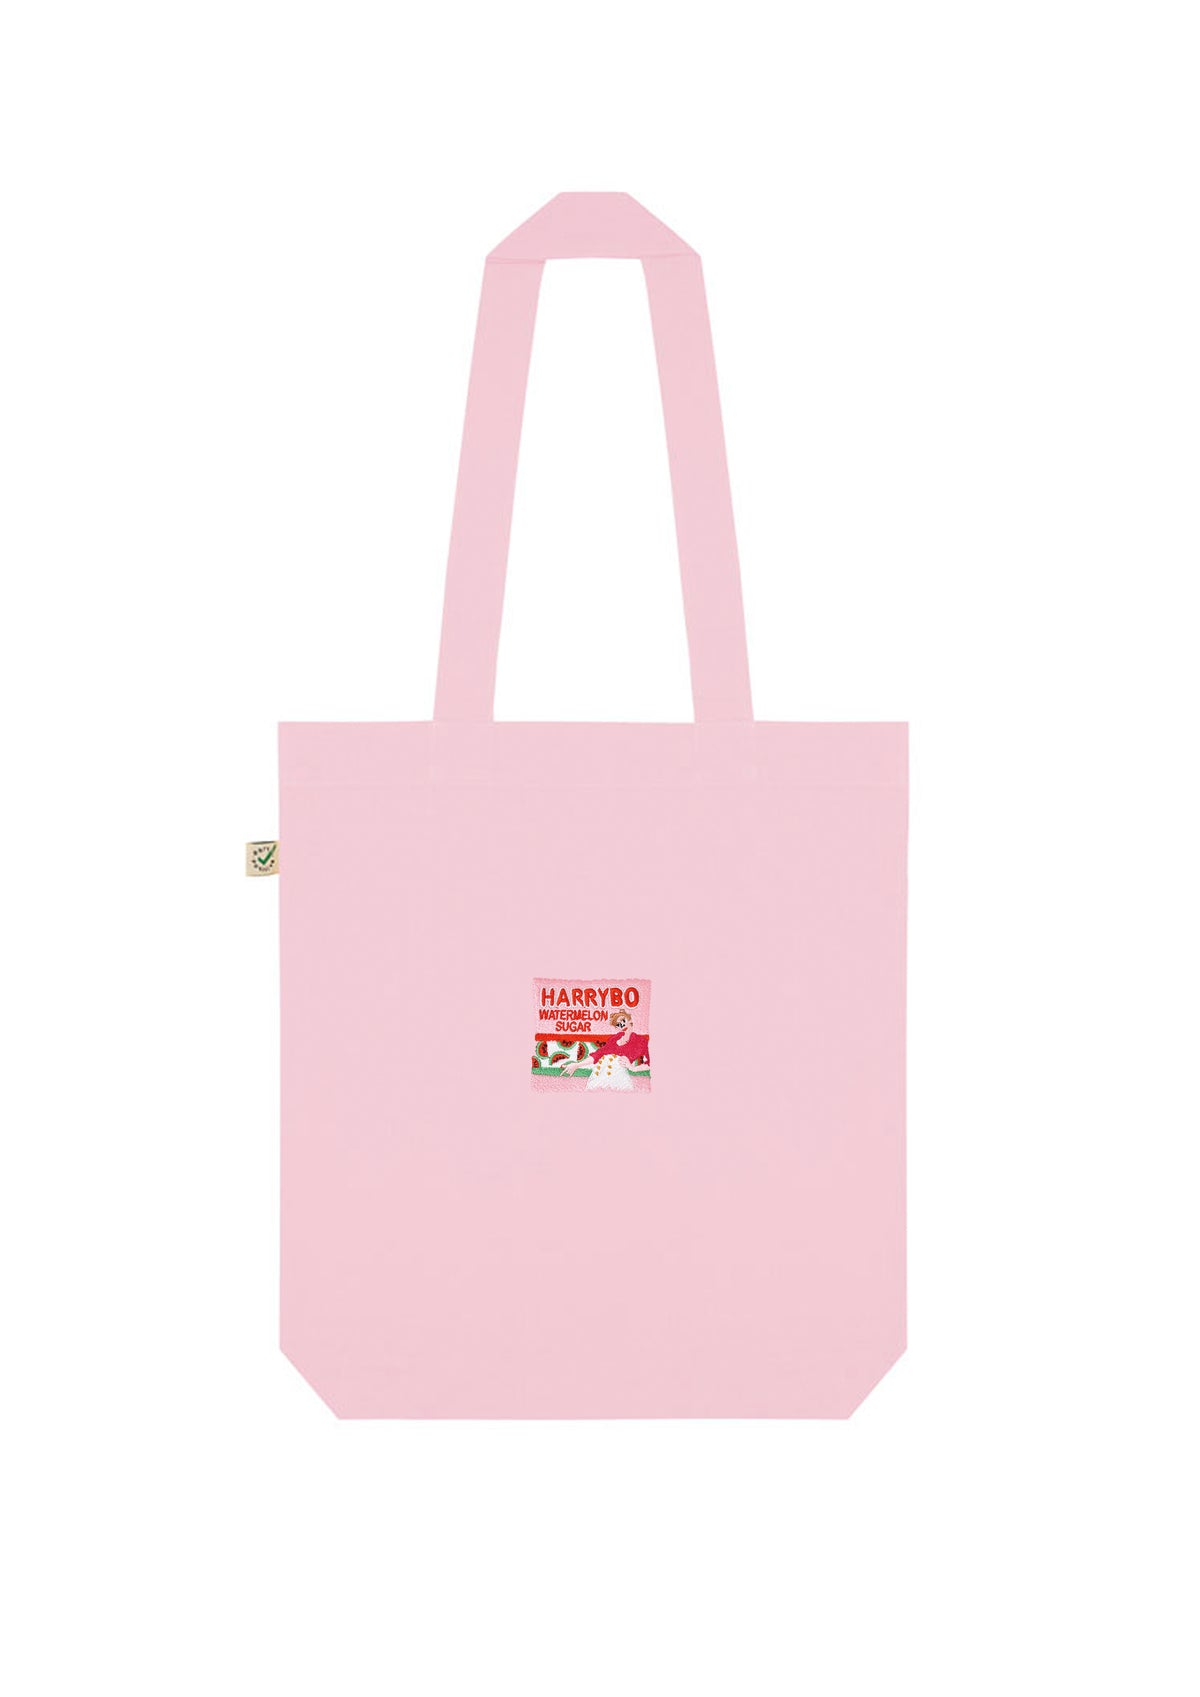 Harrybo Embroidered Tote Bag